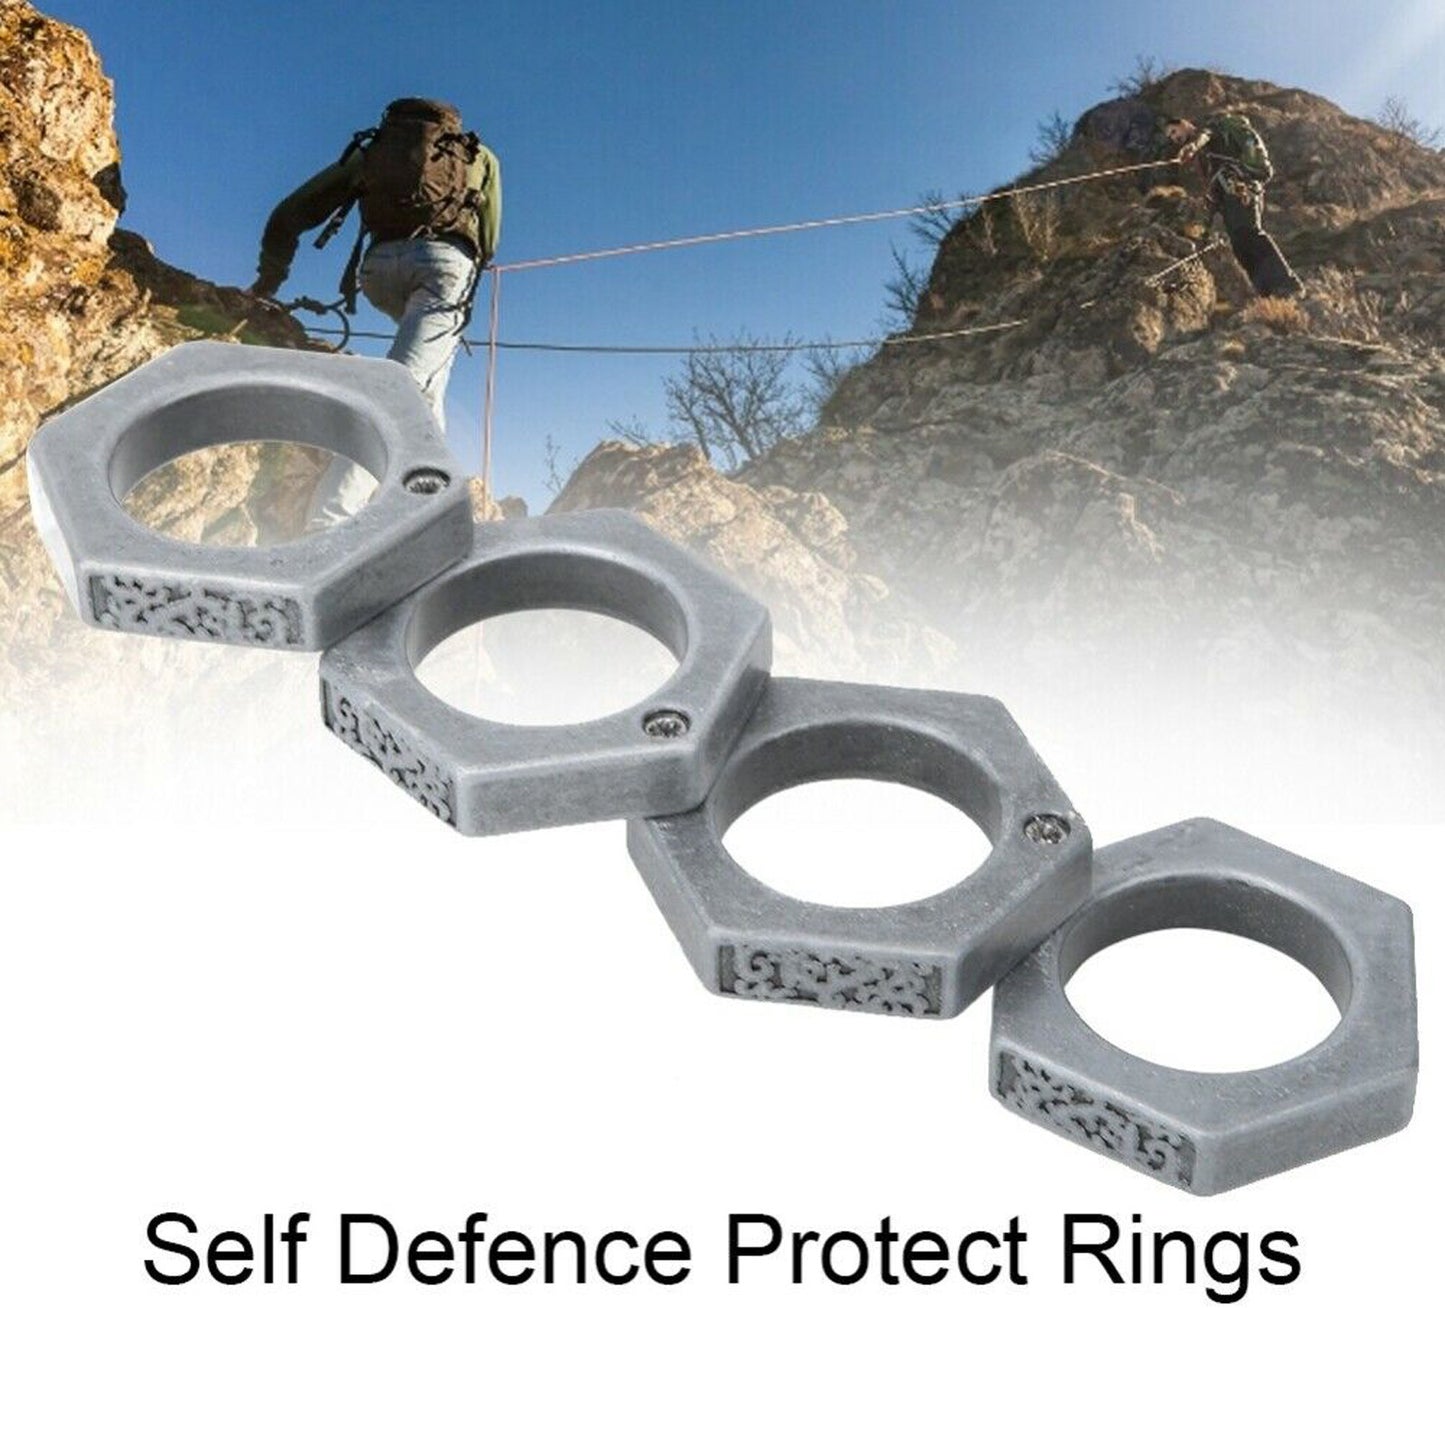 Outdoor multifunctional foldable defense ring